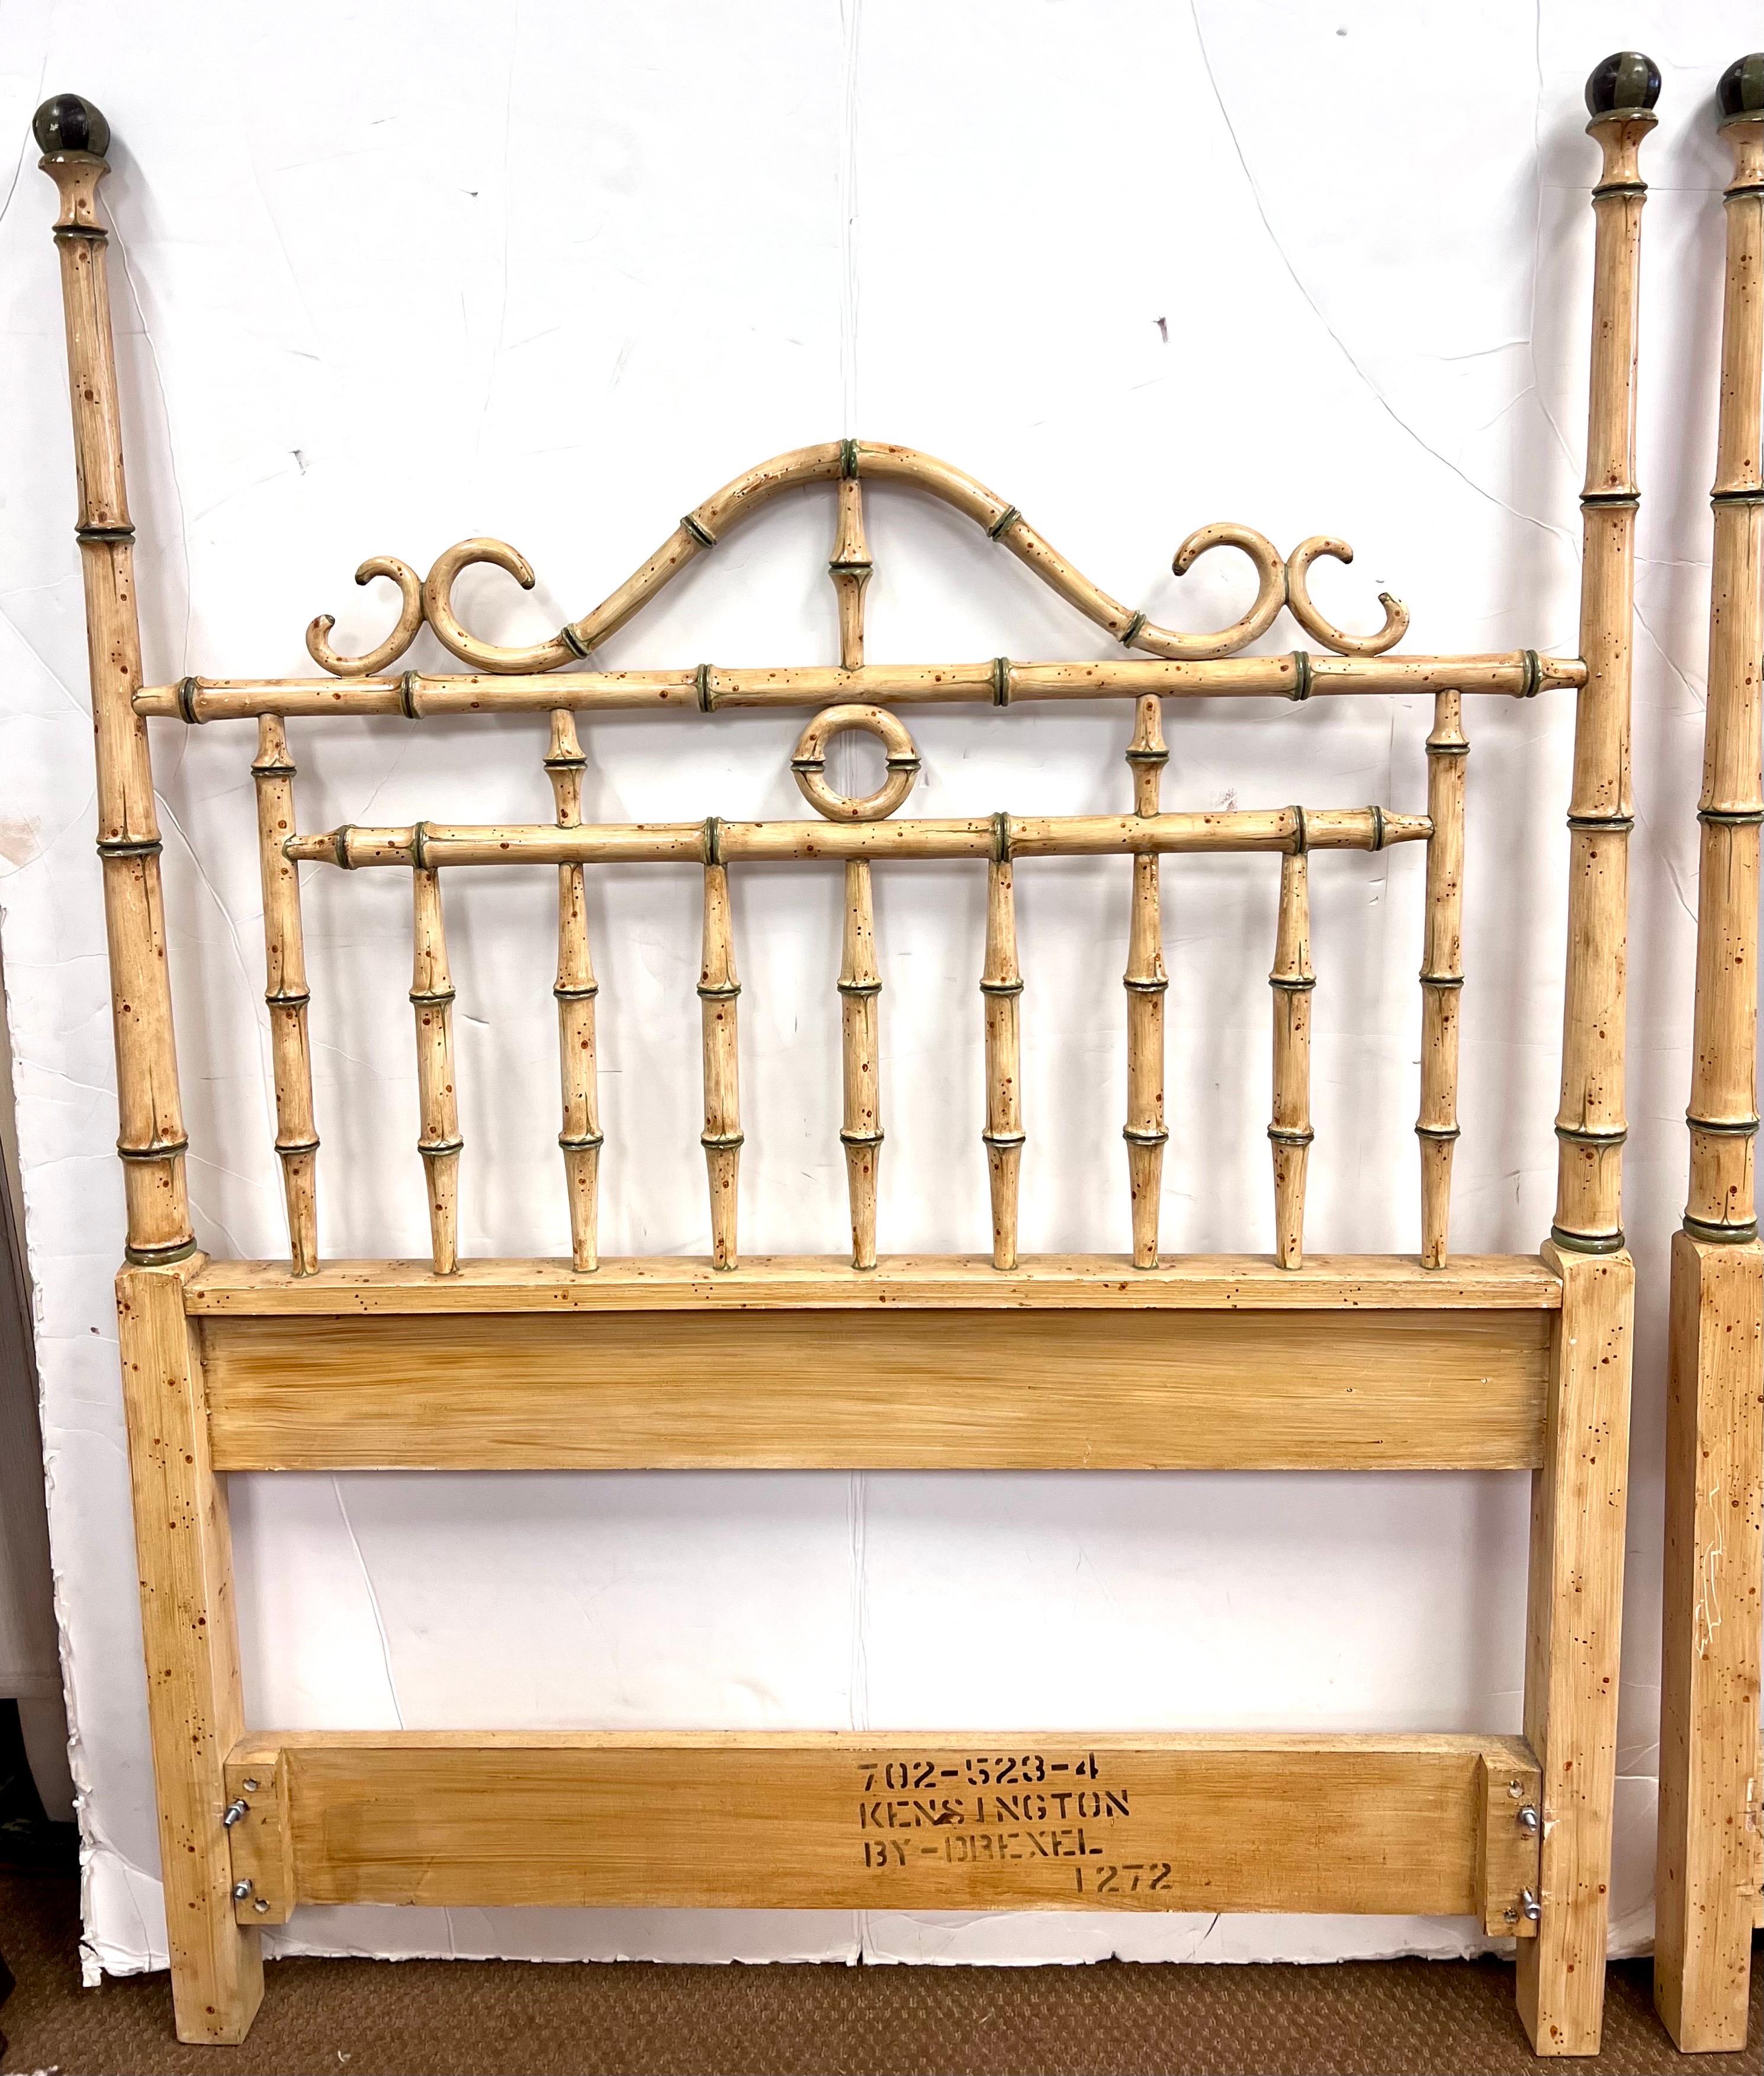 Faux bamboo headboards are beautifully carved from solid hardwood and have beautiful an aged cream finish with green accents. By Drexel.  Headboards as shown only.